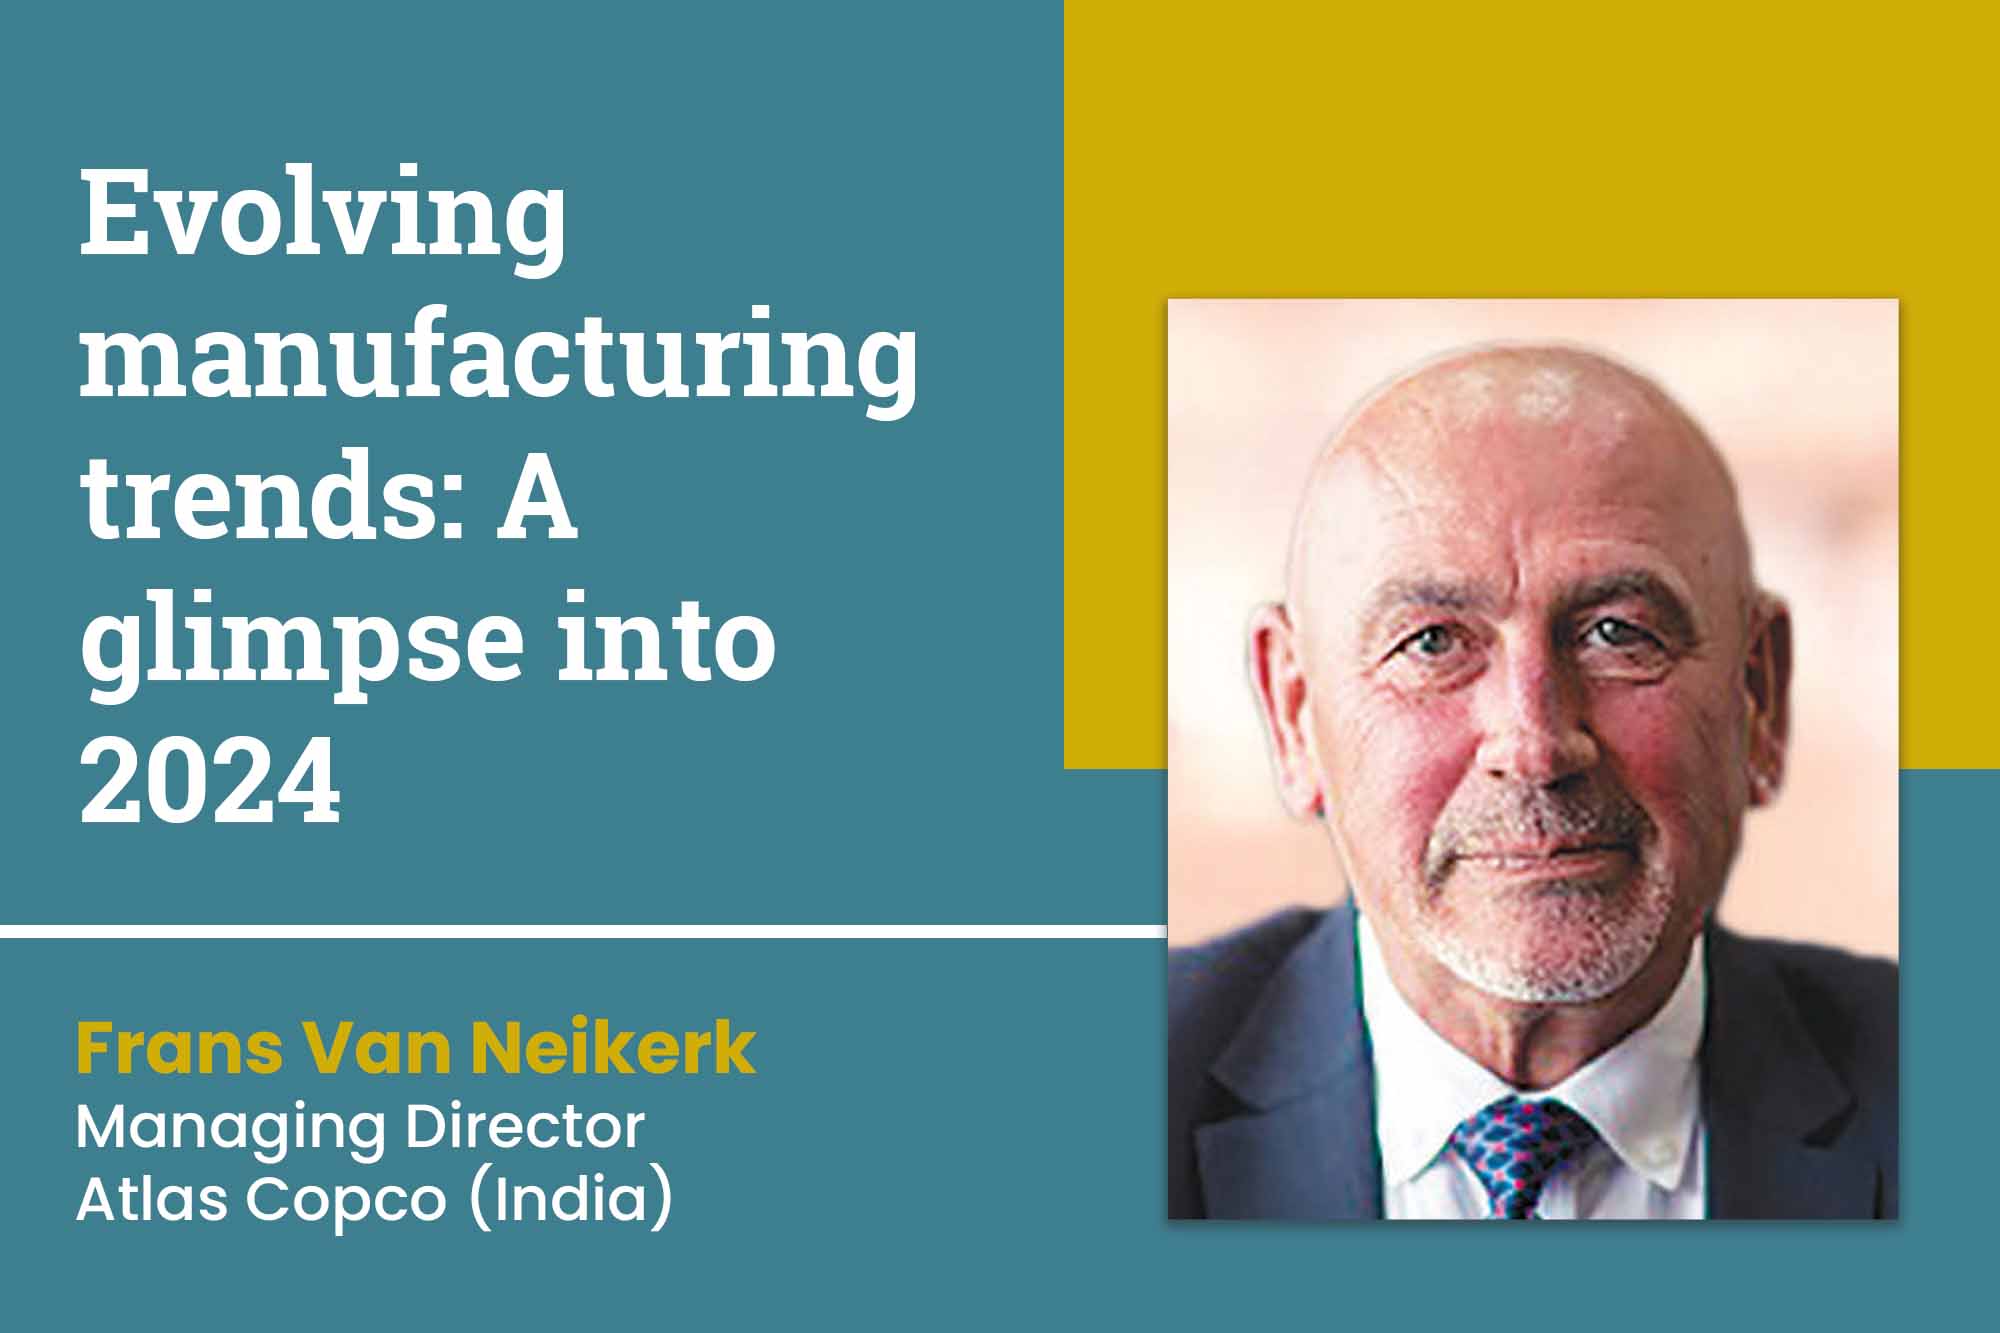 Evolving manufacturing trends: A glimpse into 2024